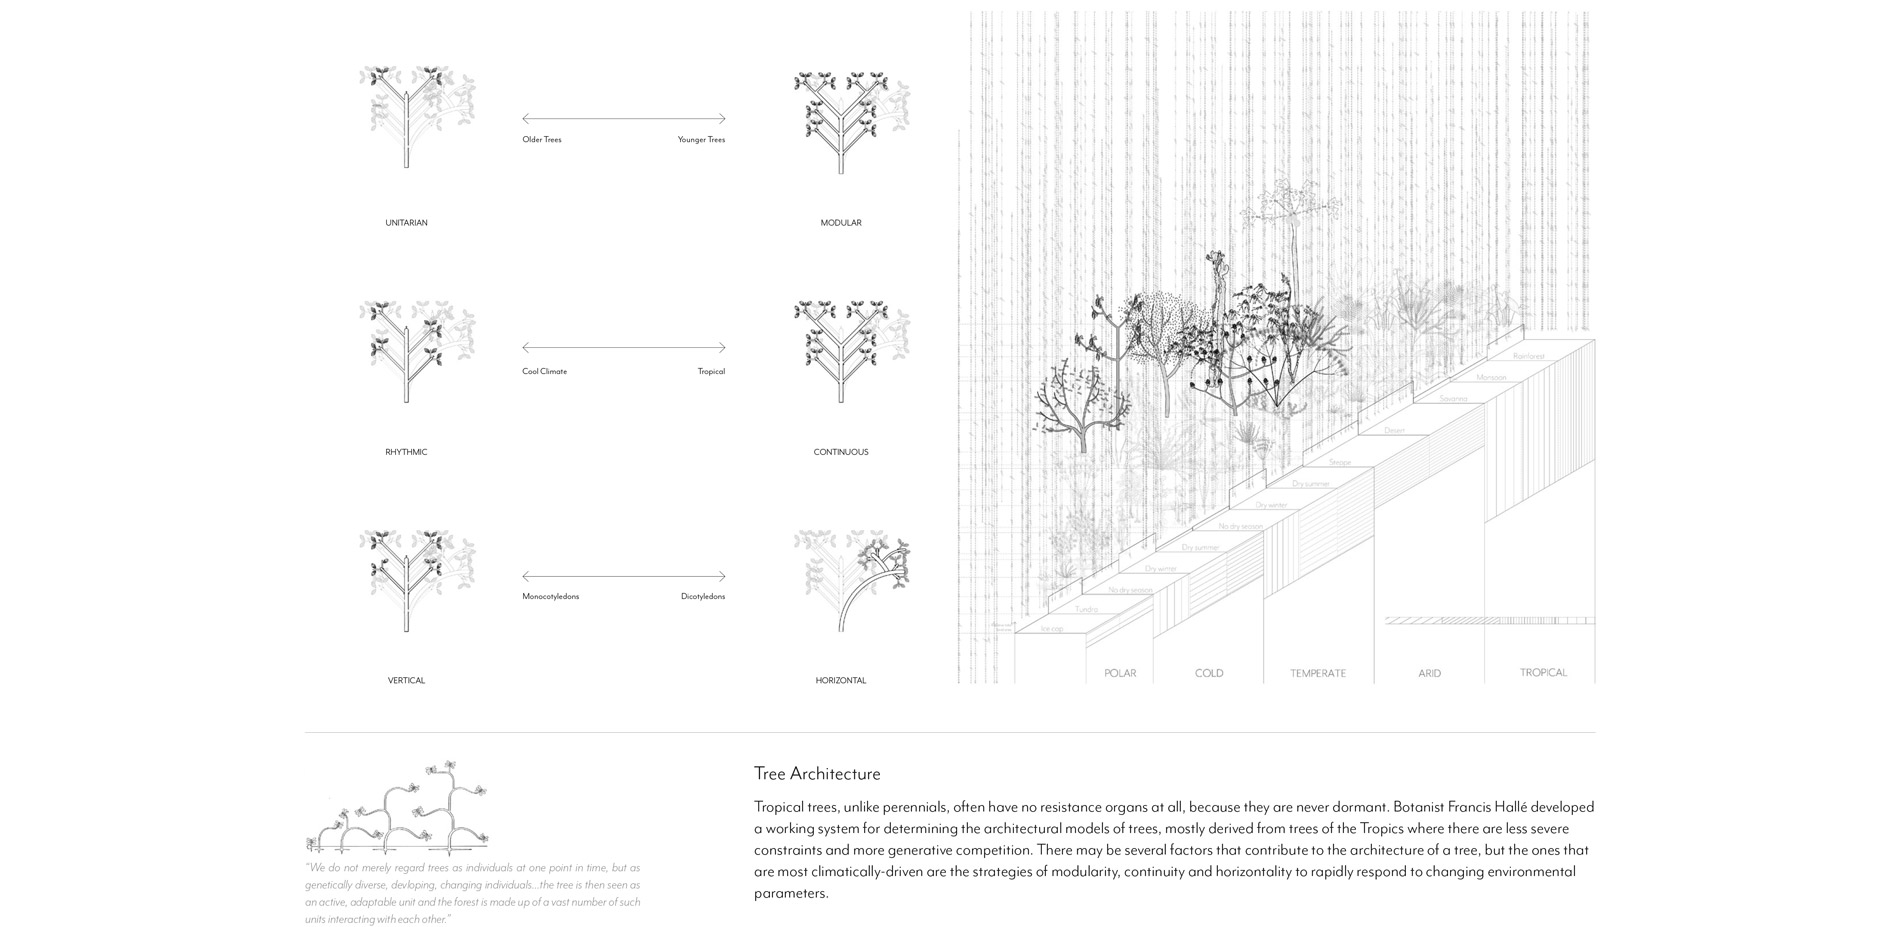 Tree Architecture; Tropical Tree Climates